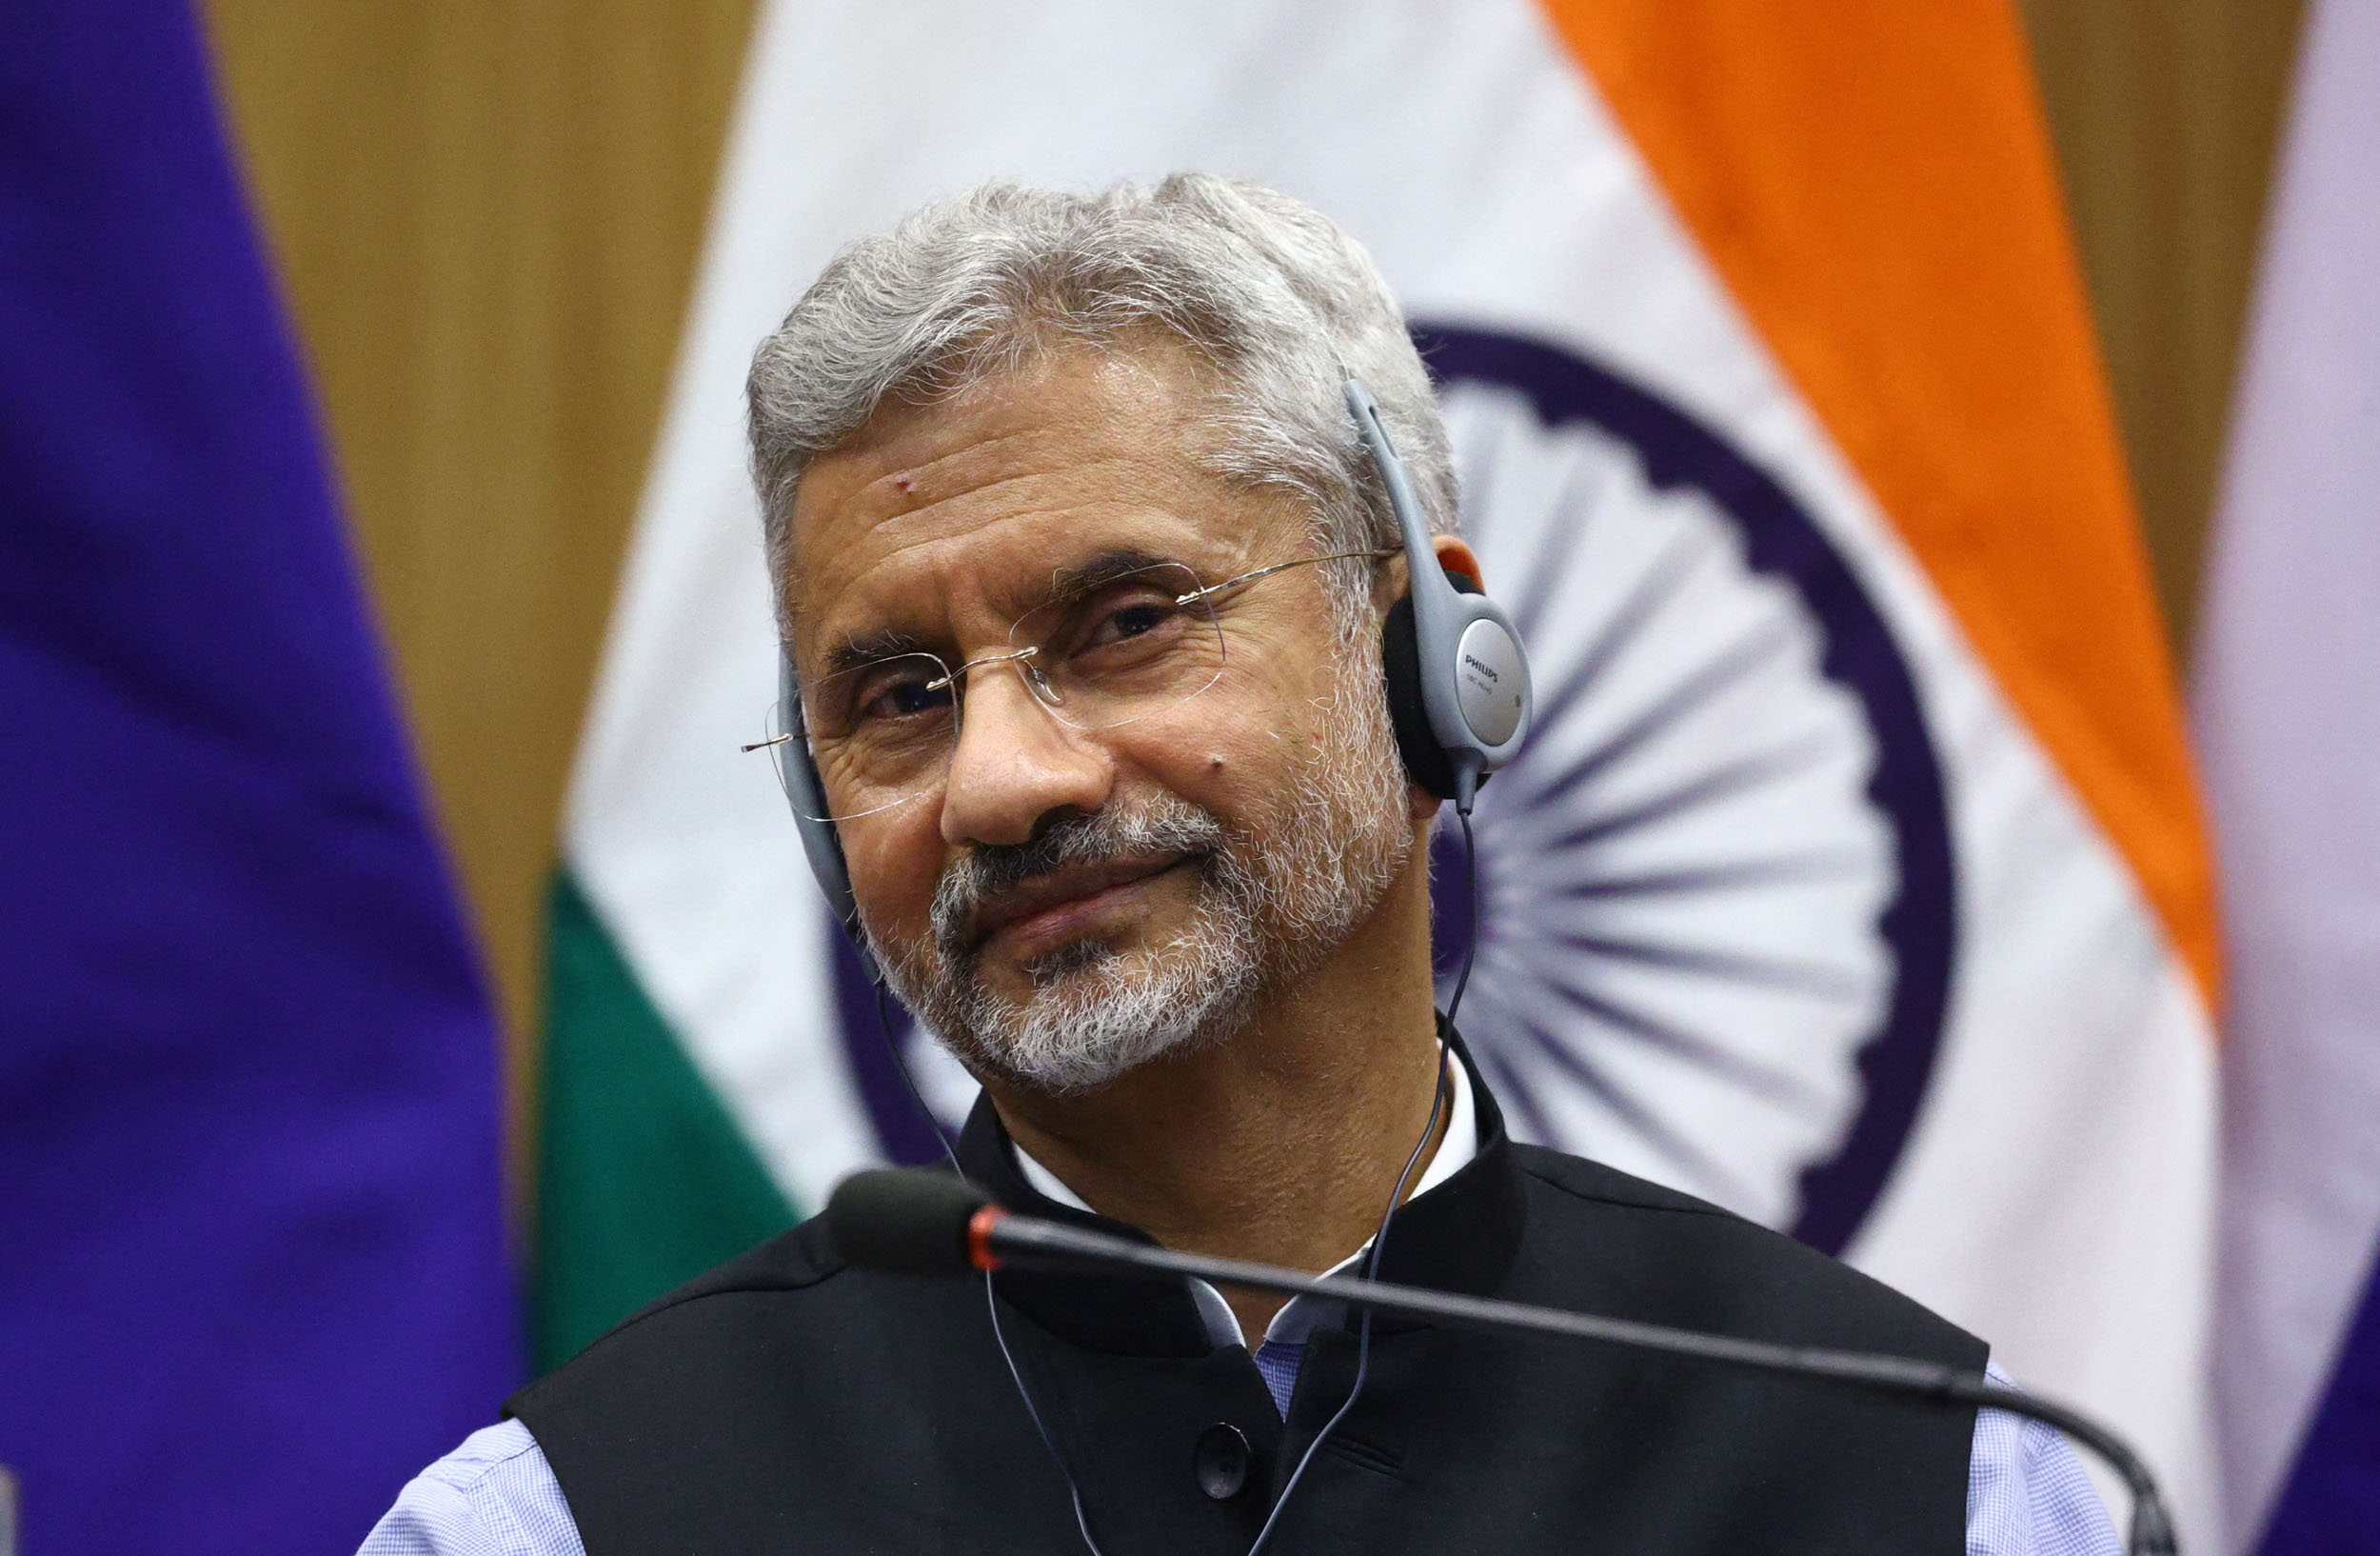 This handout picture released on April 6, 2021 by the Russian Foreign Ministry shows India's Foreign Minister Subrahmanyam Jaishankar as he attends a press conference following his meeting with his Russian counterpart in New Delhi. (Photo by Handout / RUSSIAN FOREIGN MINISTRY / AFP) / RESTRICTED TO EDITORIAL USE - MANDATORY CREDIT "AFP PHOTO / Russian Foreign Ministry / handout " - NO MARKETING - NO ADVERTISING CAMPAIGNS - DISTRIBUTED AS A SERVICE TO CLIENTS